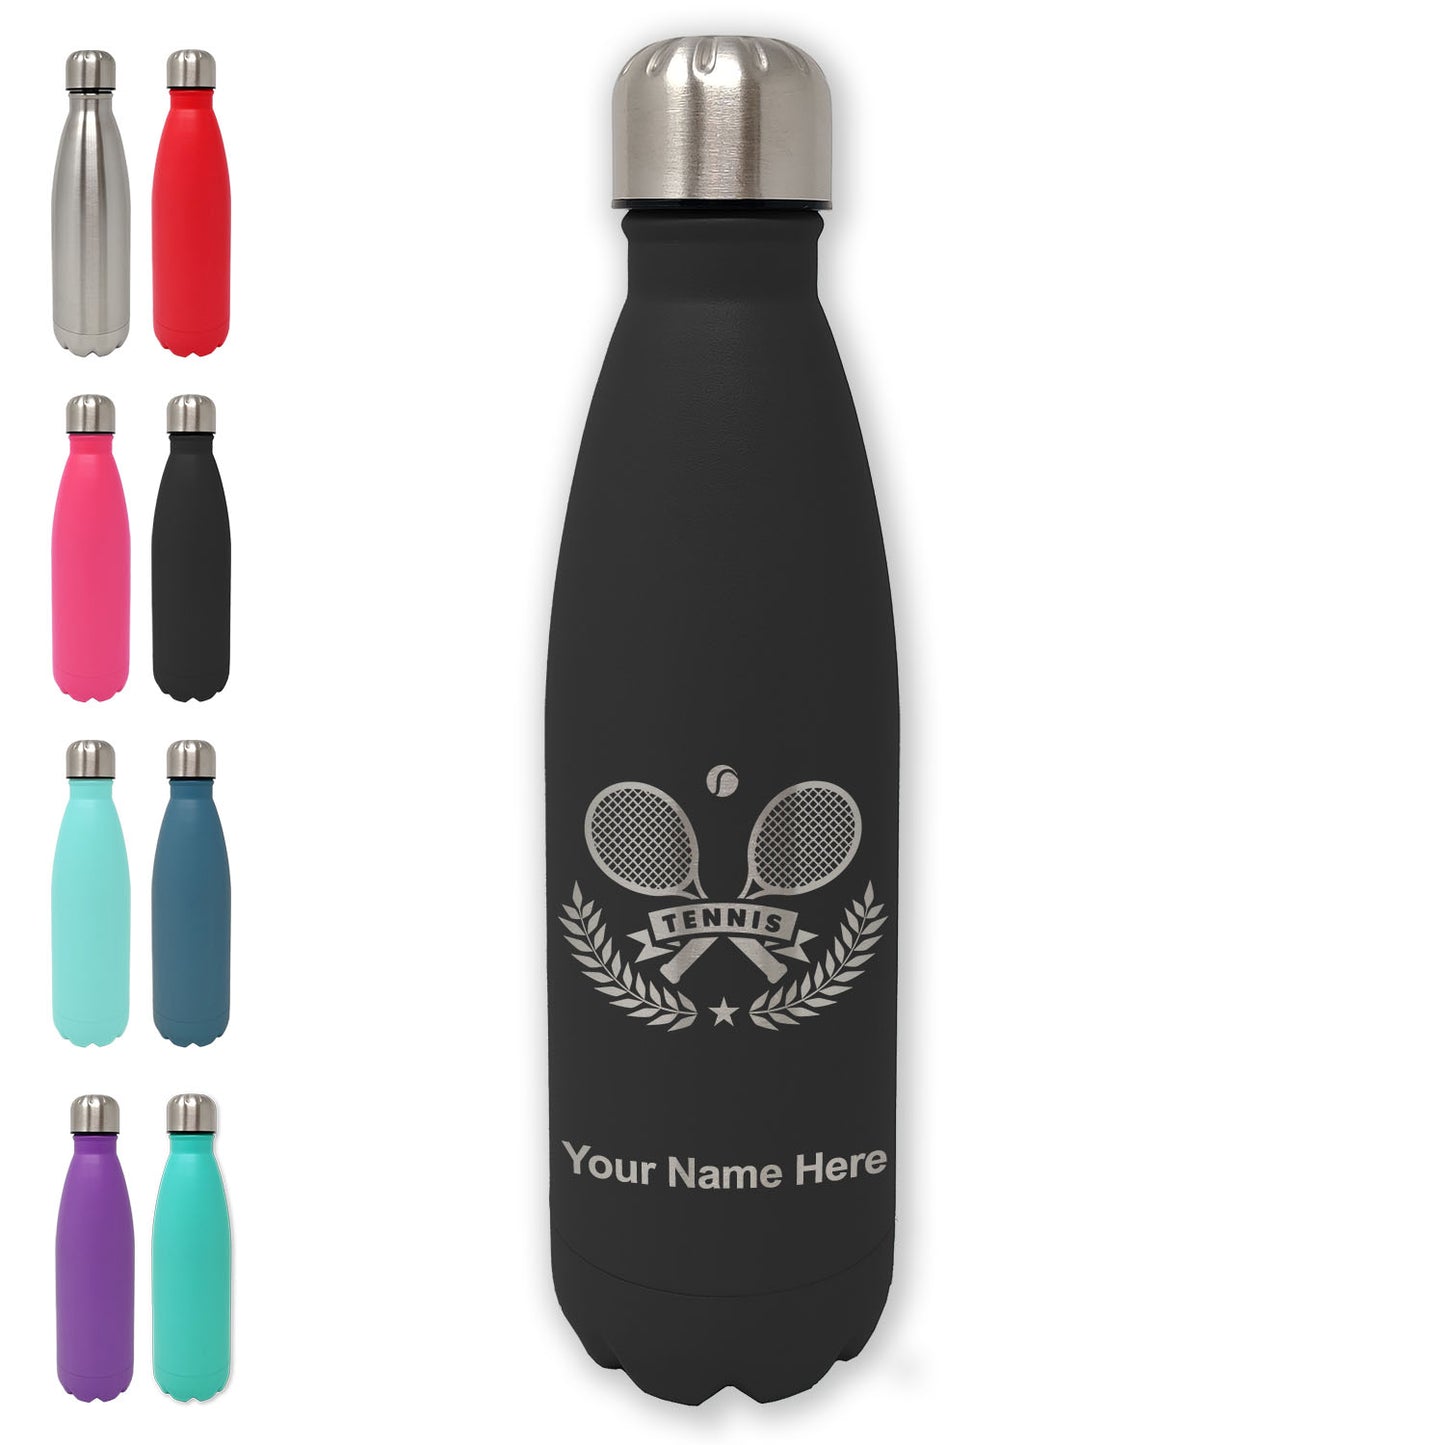 LaserGram Double Wall Water Bottle, Tennis Rackets, Personalized Engraving Included